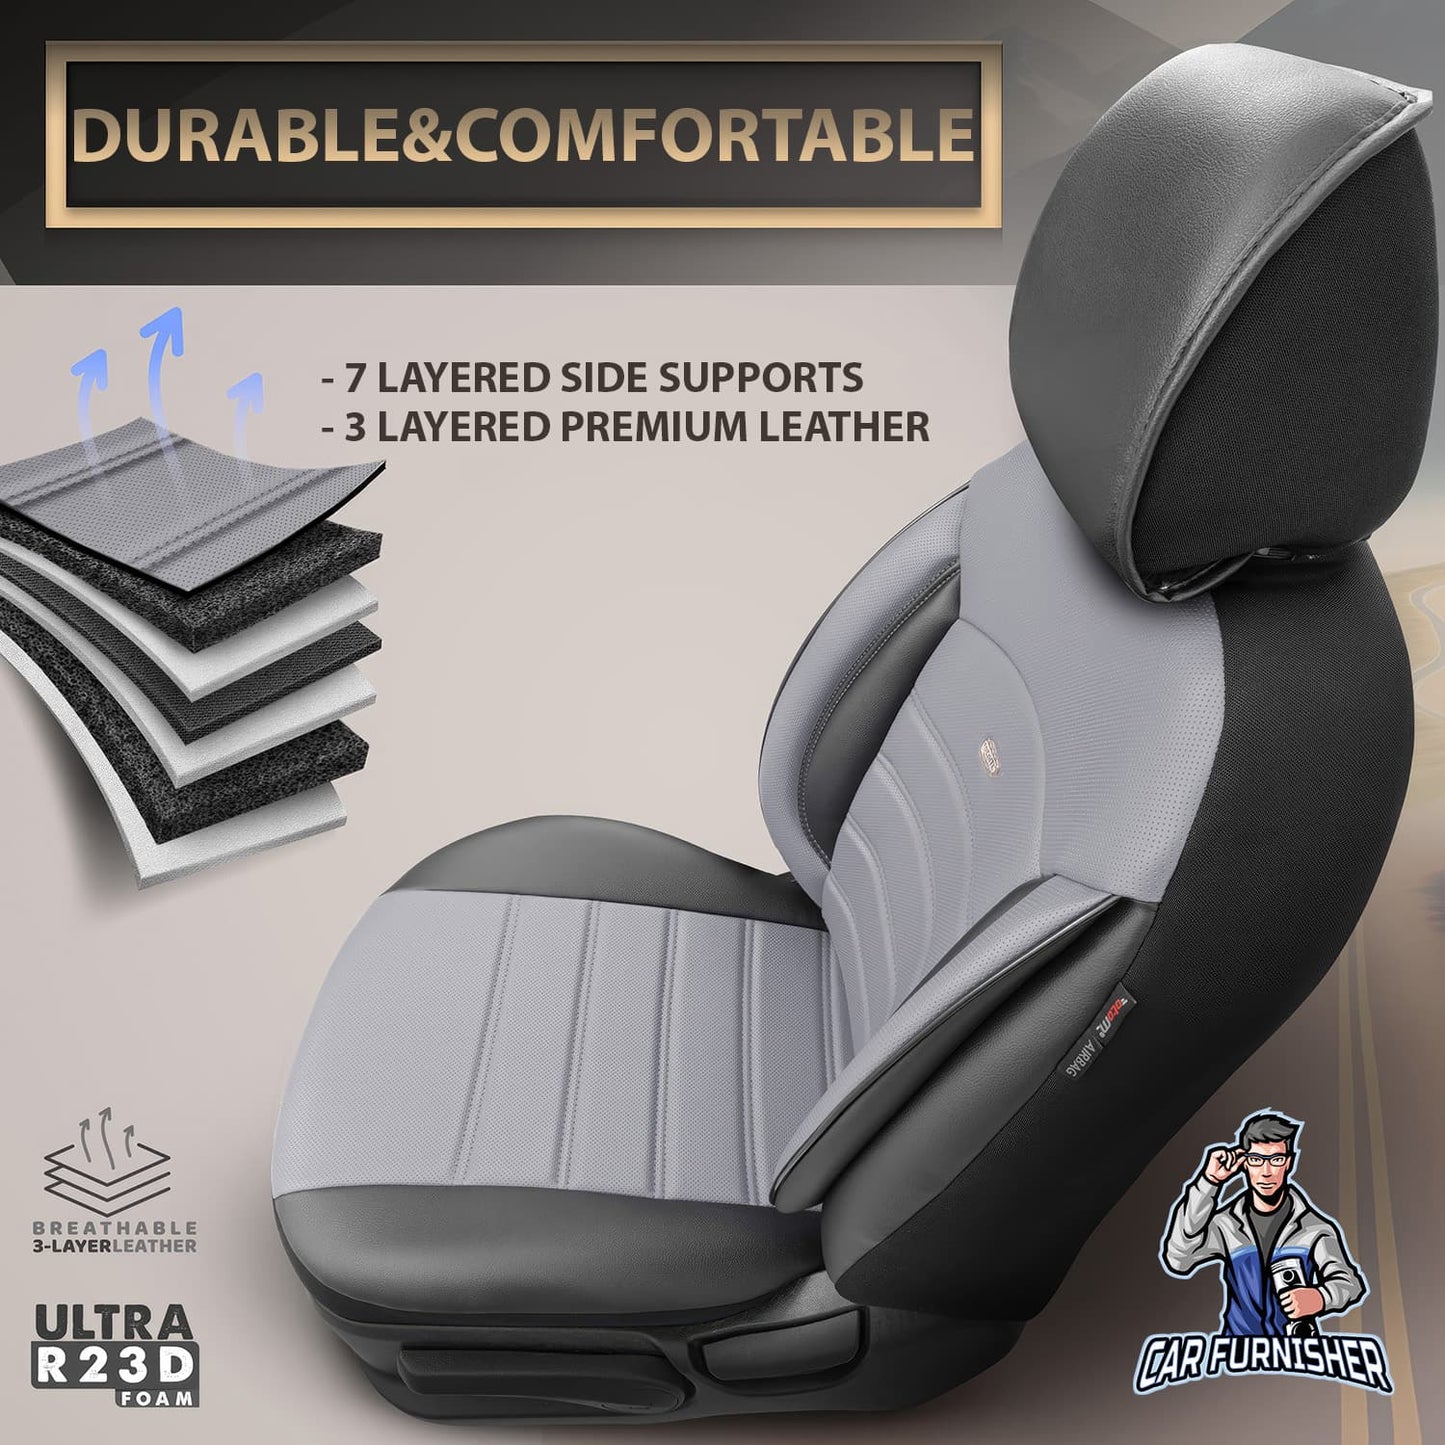 Mercedes 190 Seat Covers Inspire Design Smoked 5 Seats + Headrests (Full Set) Full Leather